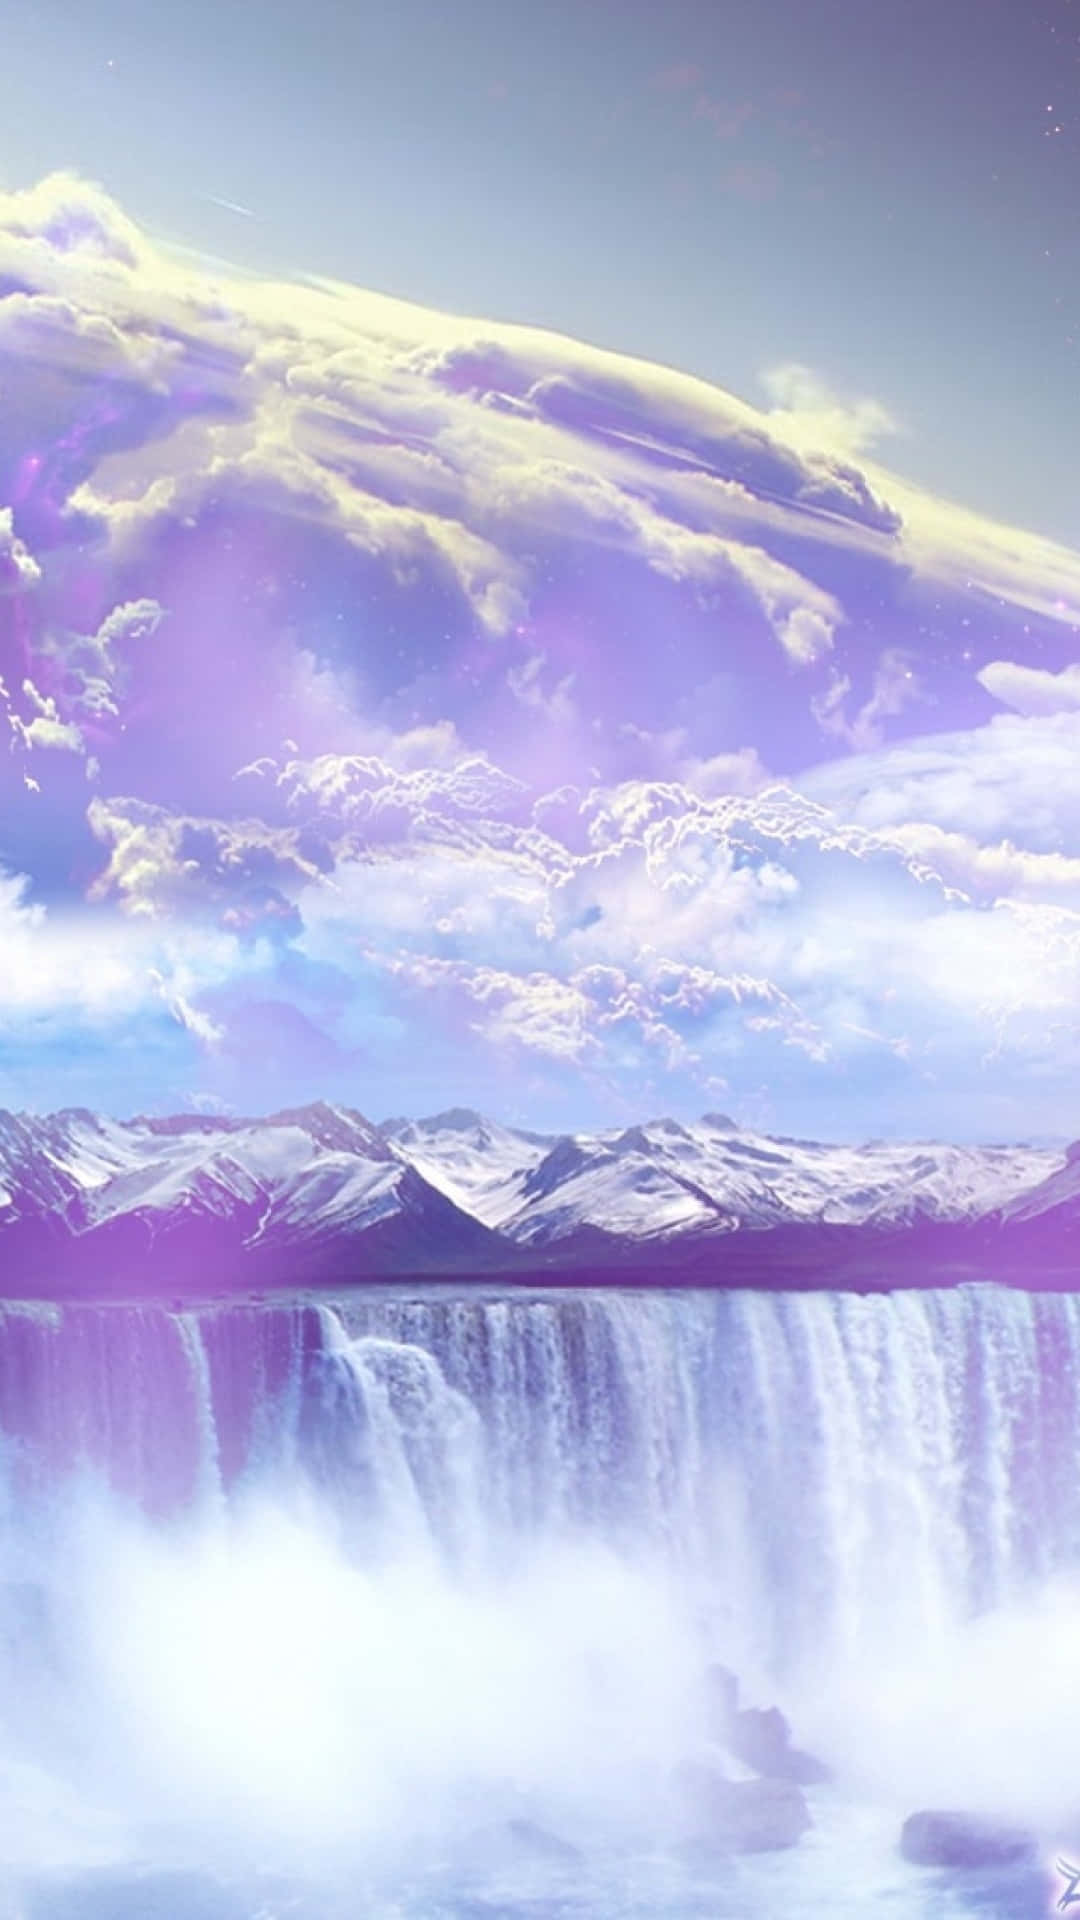 A Purple Waterfall With Clouds And Mountains